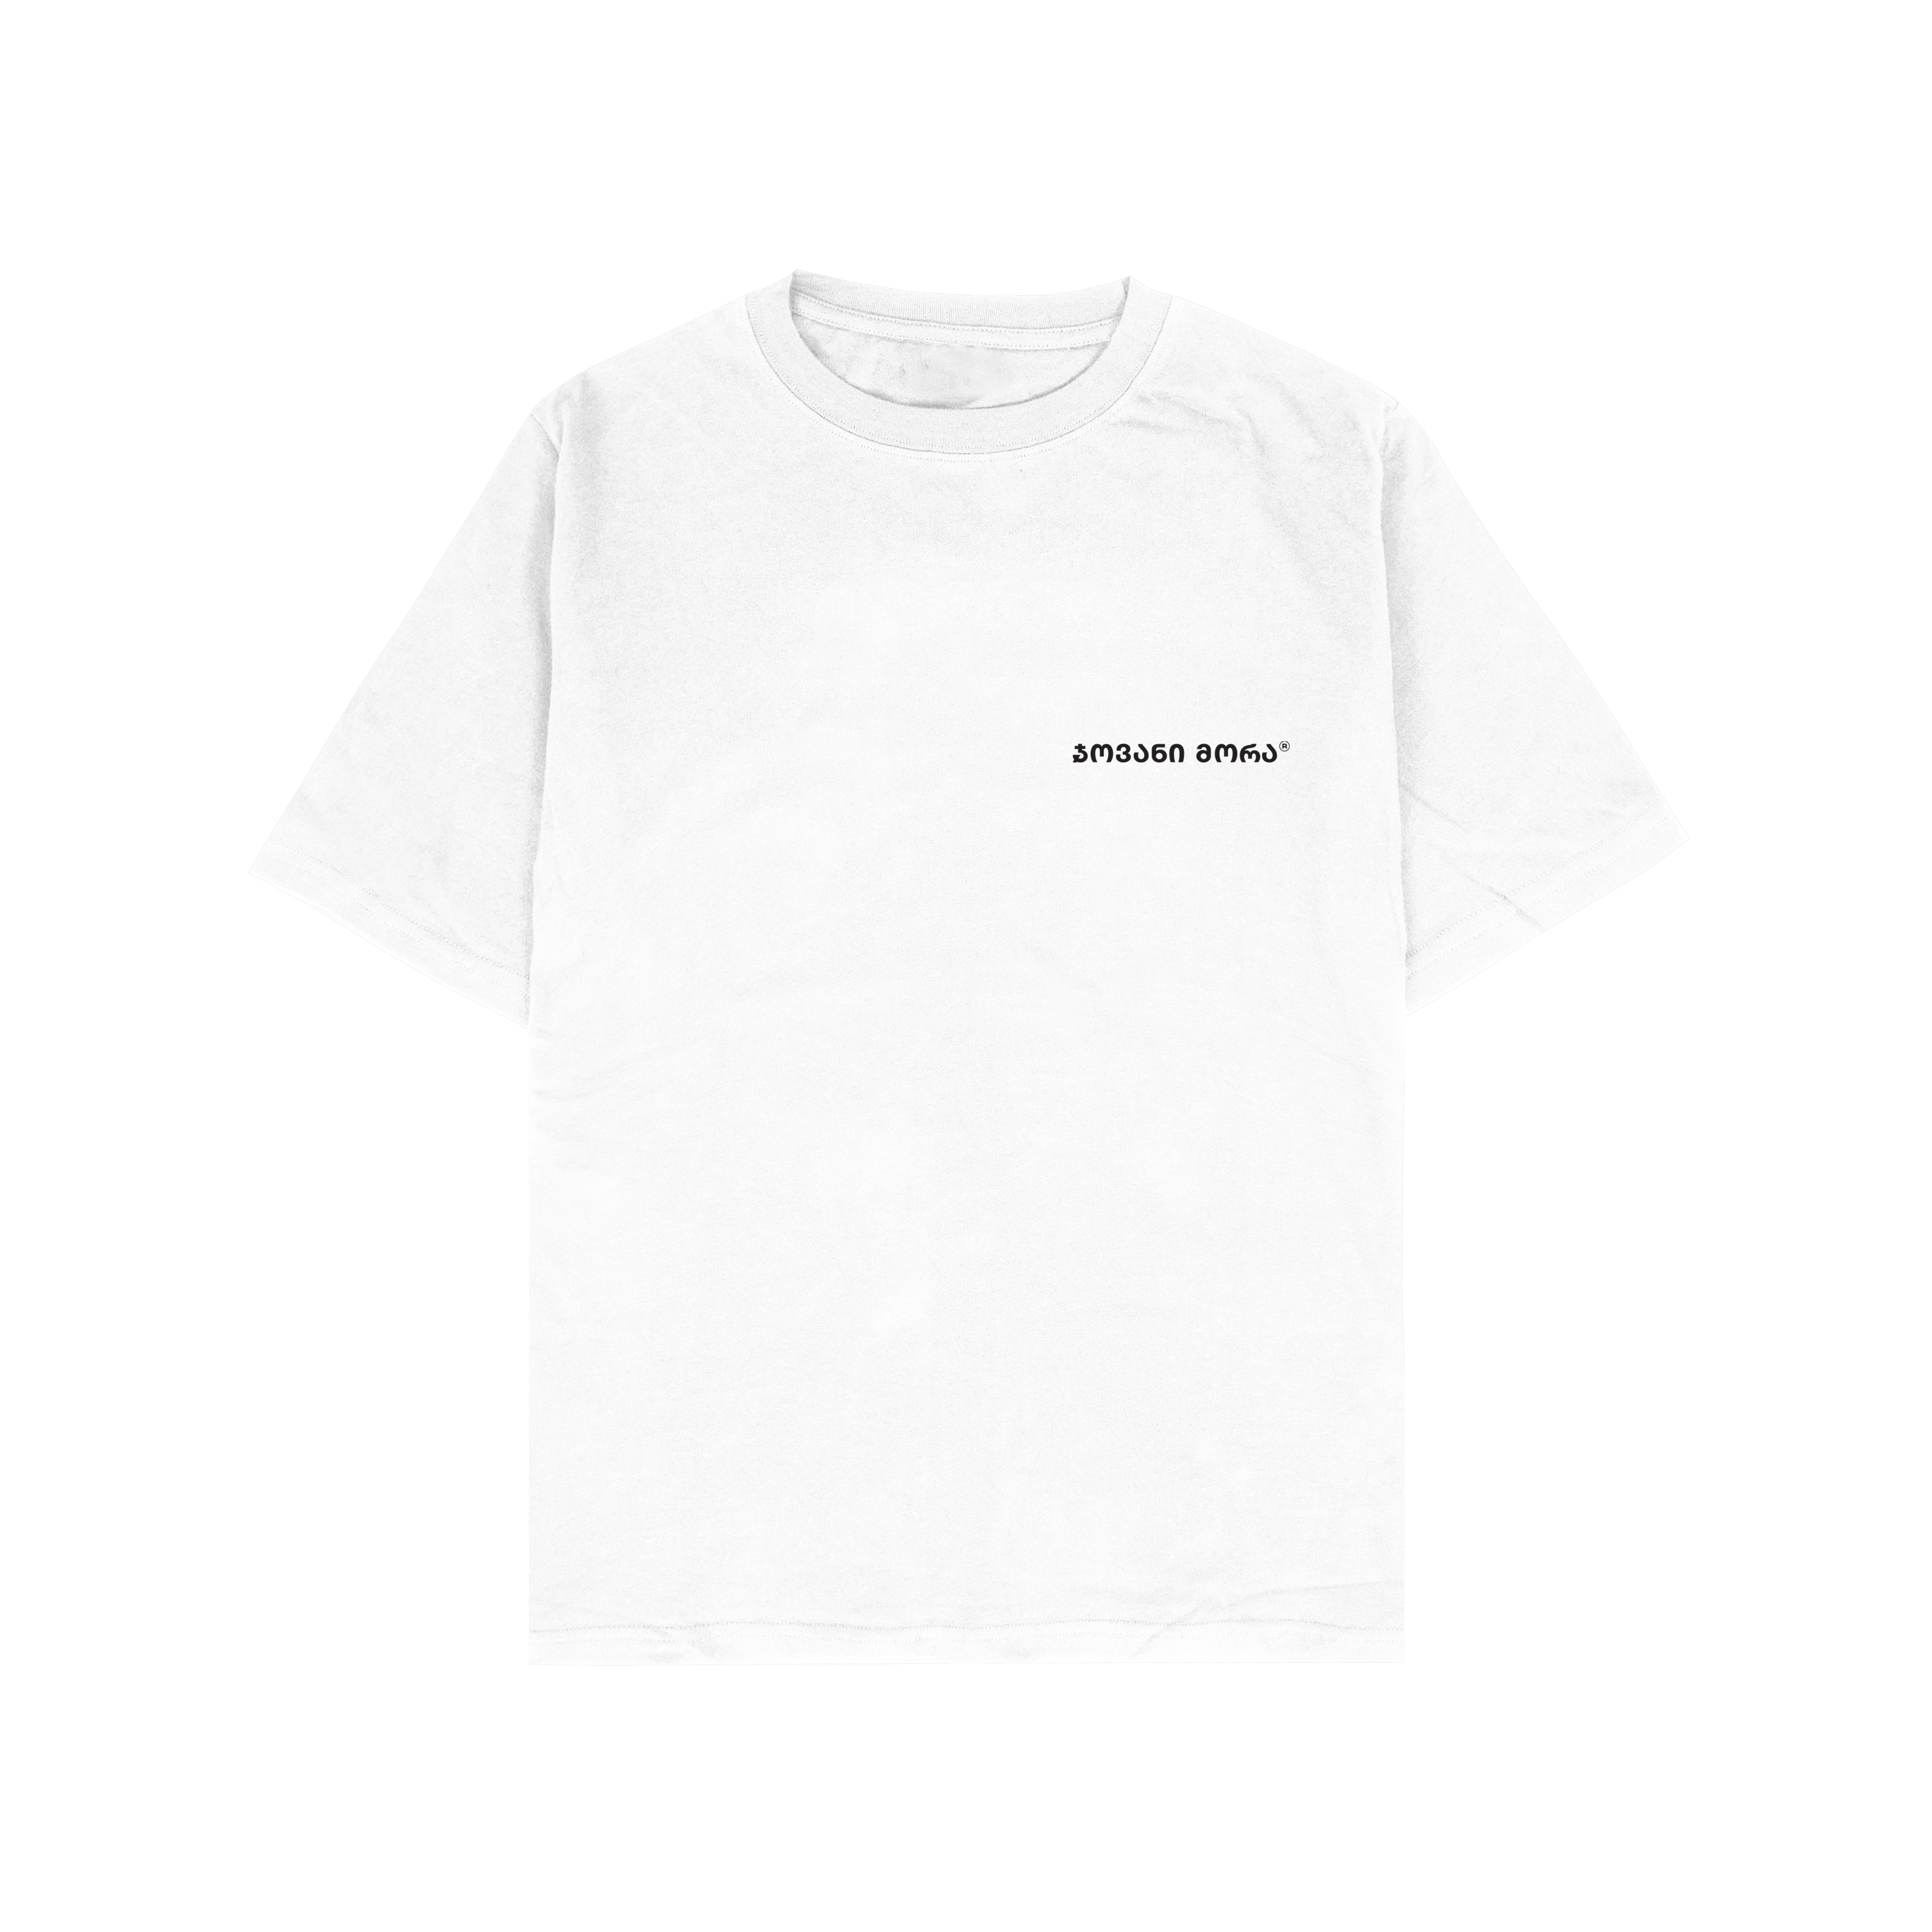 T-shirt (White), Relaxed Fit